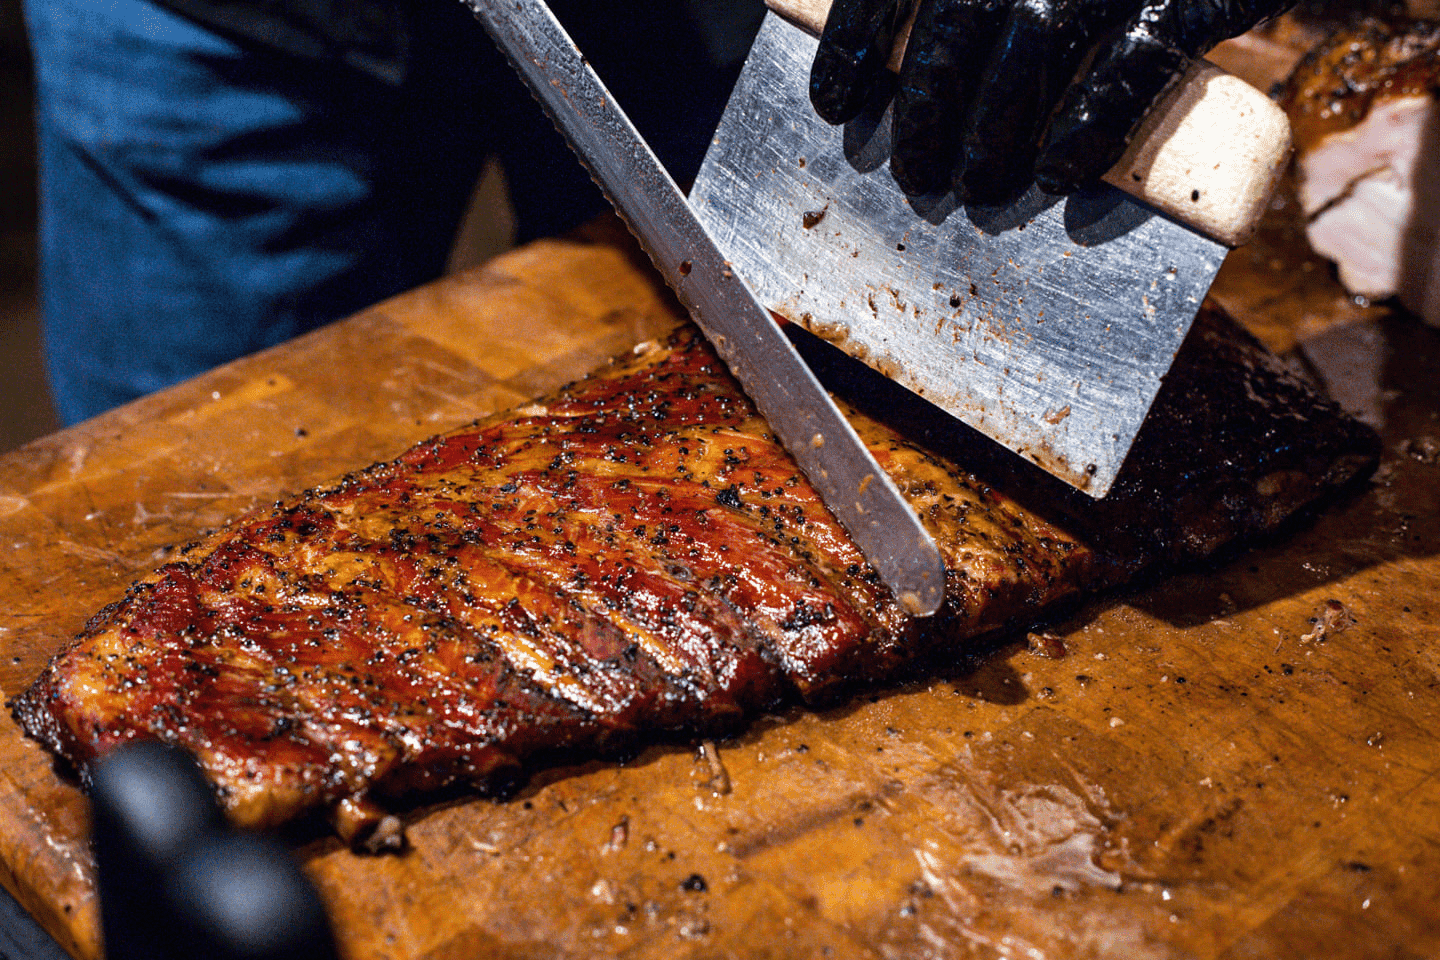 New Episode This Weekend: Short Ribs Three Days in the Making, Out-of-This-World ’Cue & Grilling Tips from Black’s Pro Pitmaster